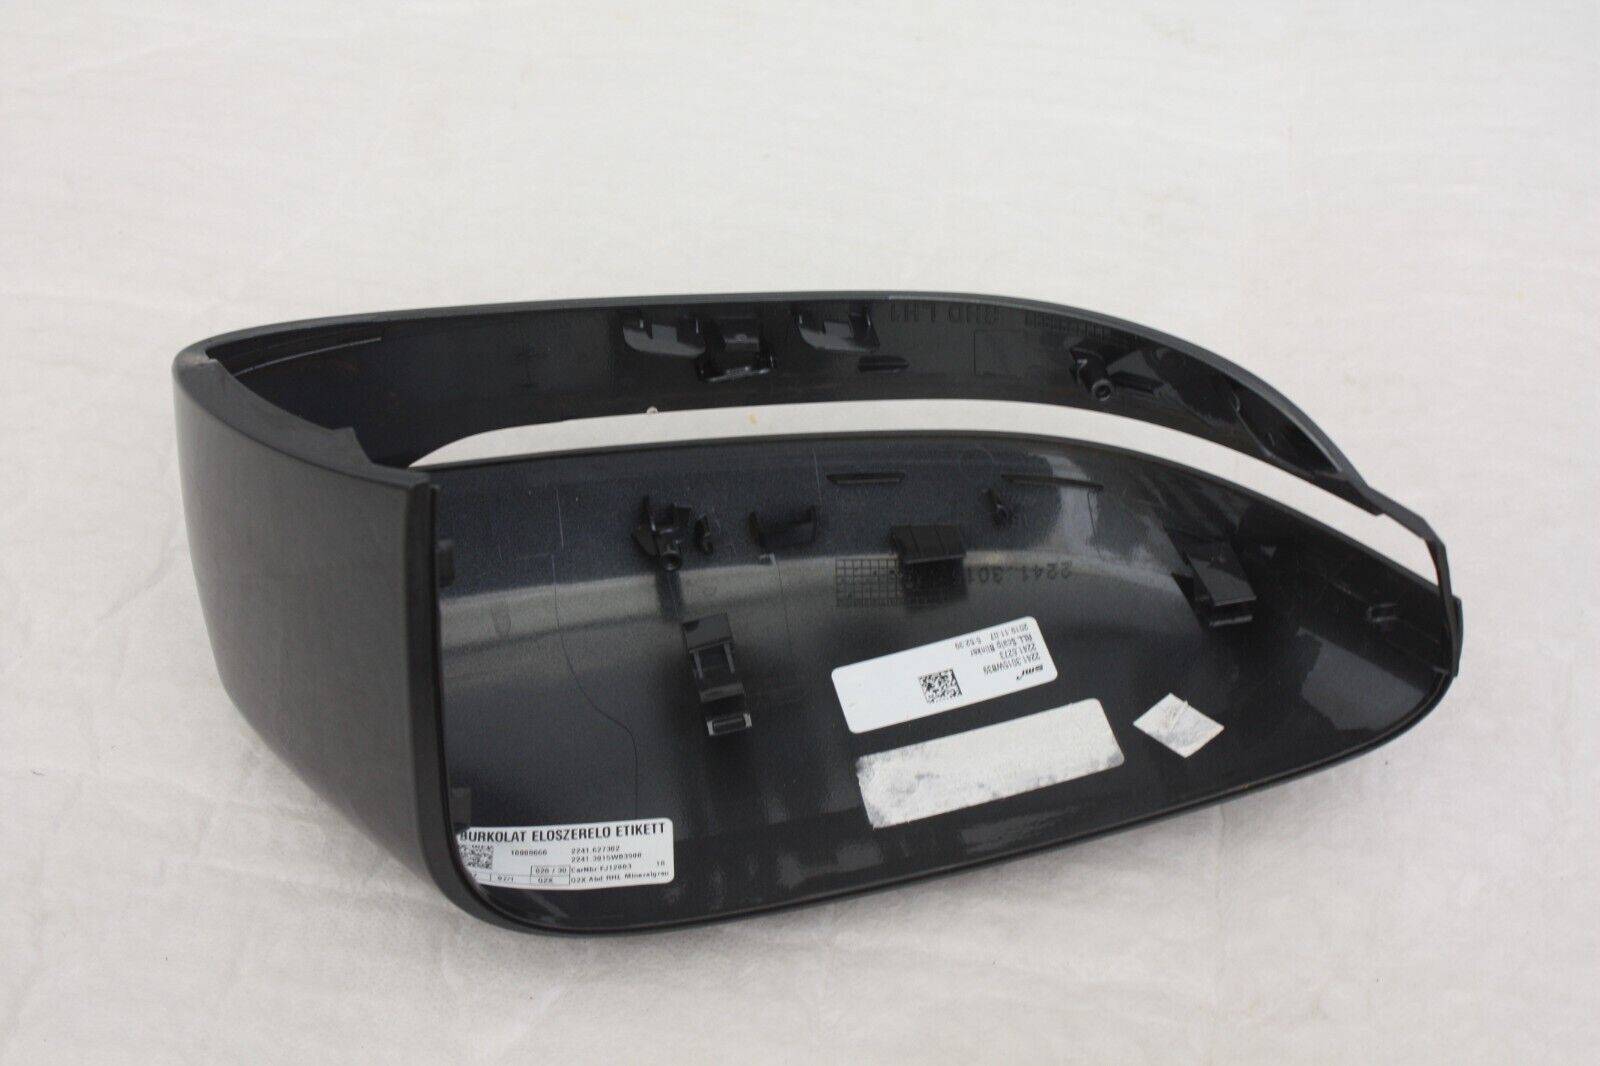 BMW-3-Series-G20-G21-Left-Mirror-Cover-Cap-2019-TO-2023-22416273-Genuine-176344088889-2